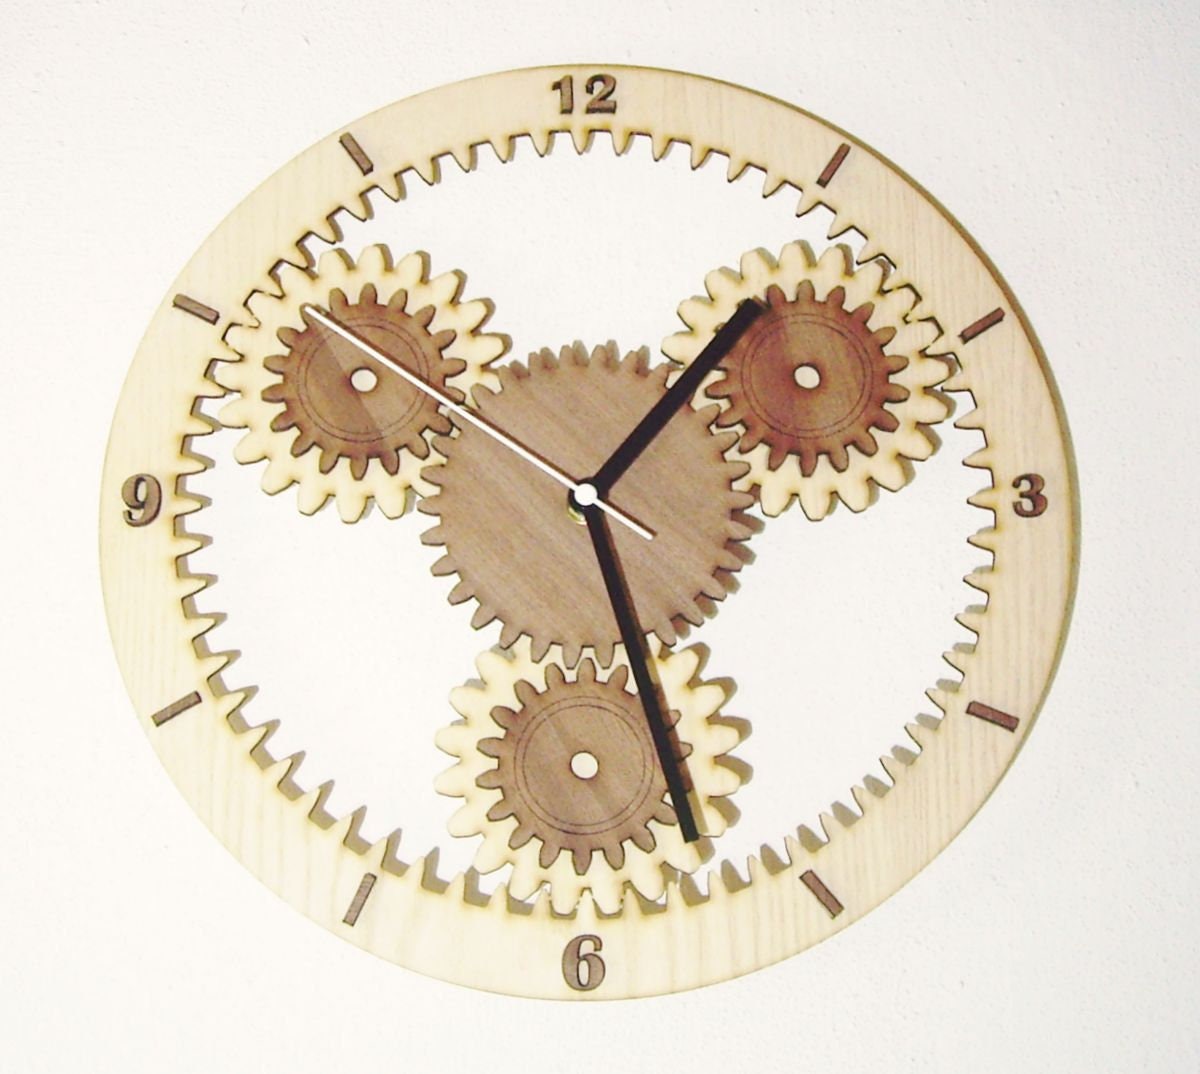 Gear Clock Wooden Steampunk Gear Clock MDF Hand Painted Gold Silver Copper  Handcrafted CNC Machined Mantel Clock Wedding Gift 